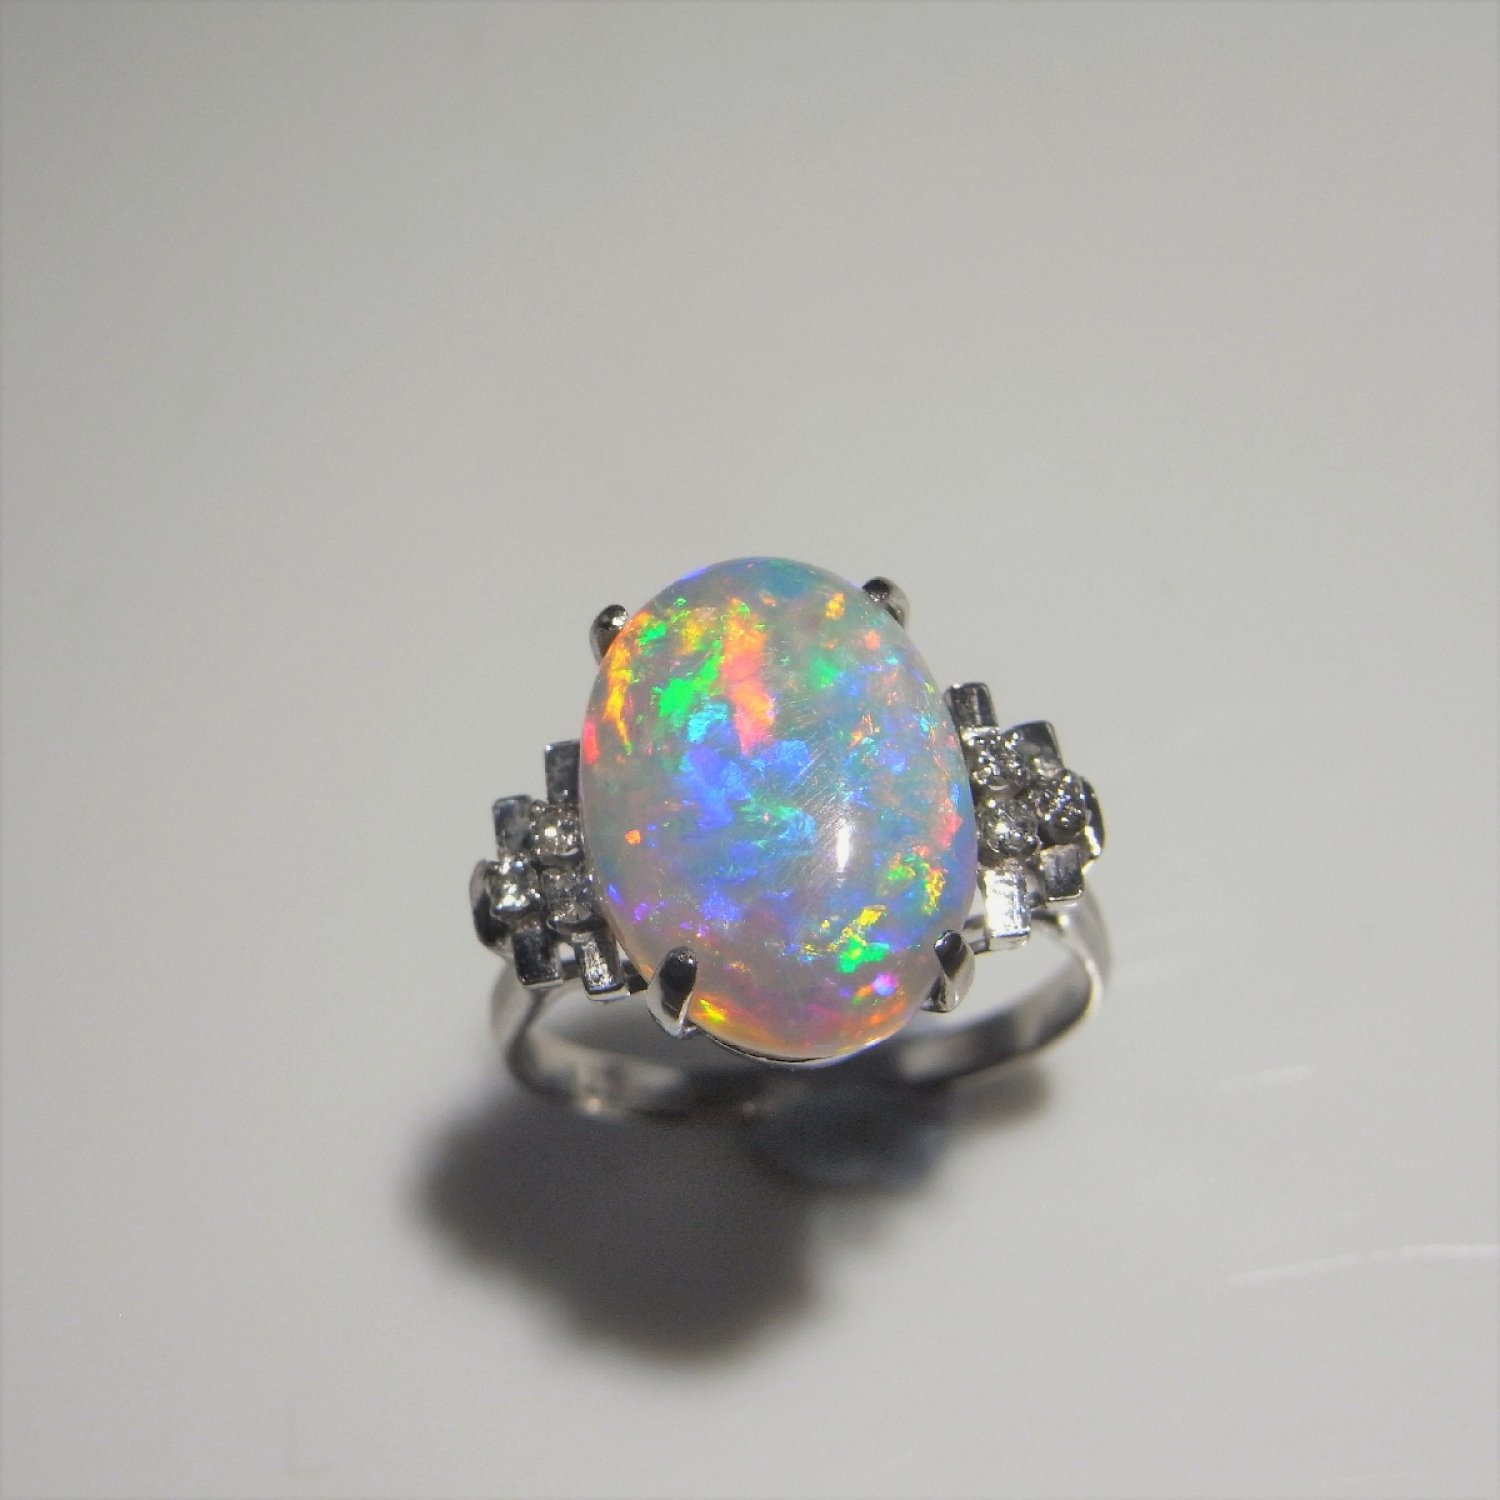 A Large Handmade Natural Australian Opal Diamond Engagement Ring in ...